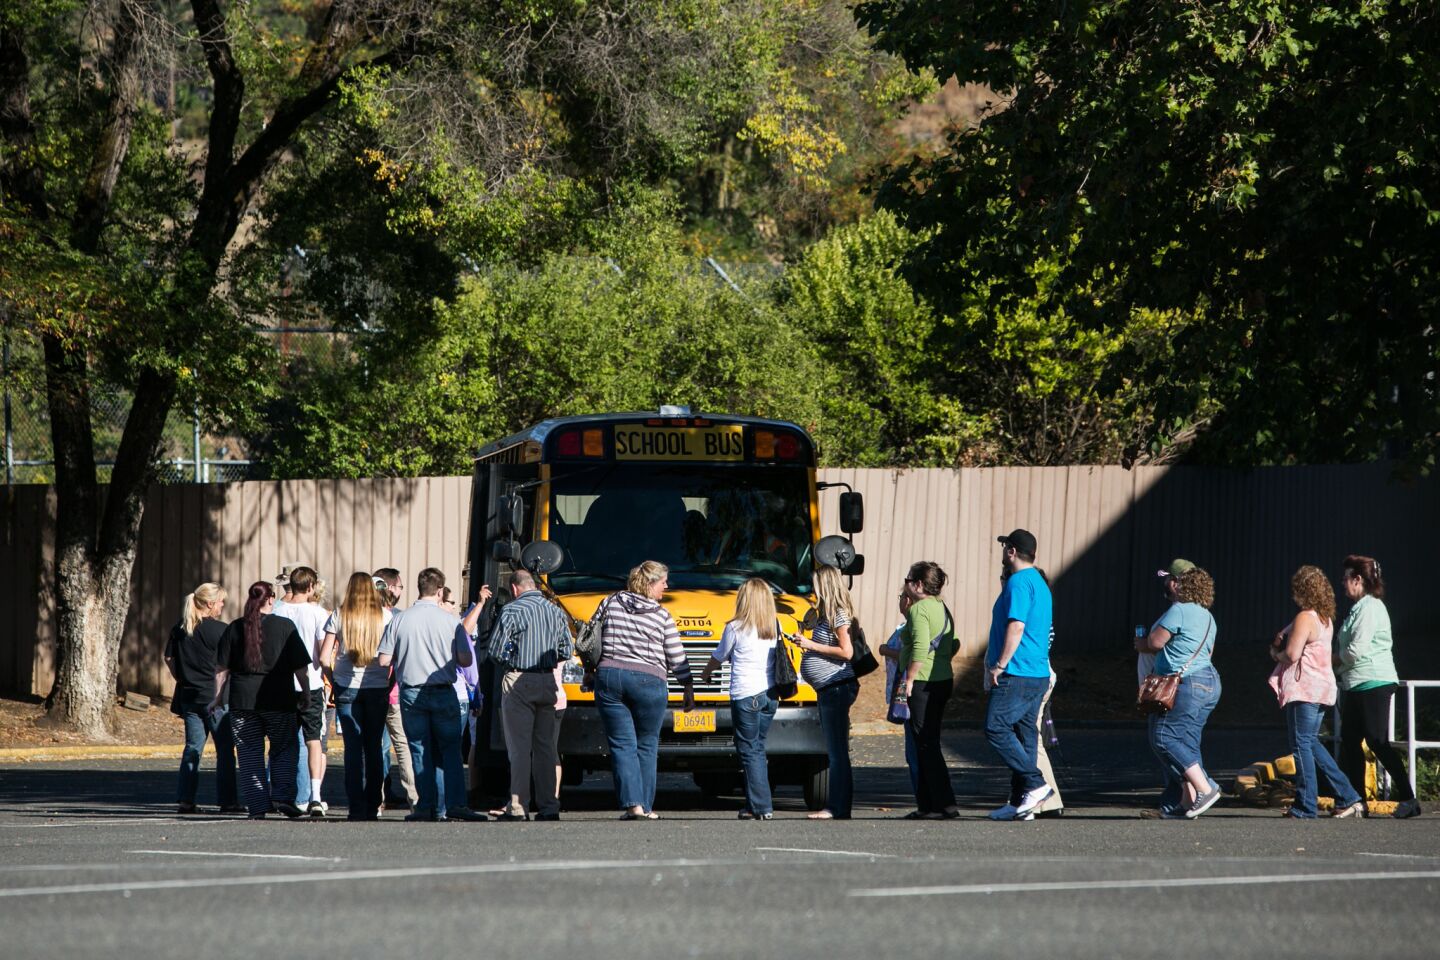 People board buses to retrieve their vehicles at Umpqua Community College after the mass shooting.